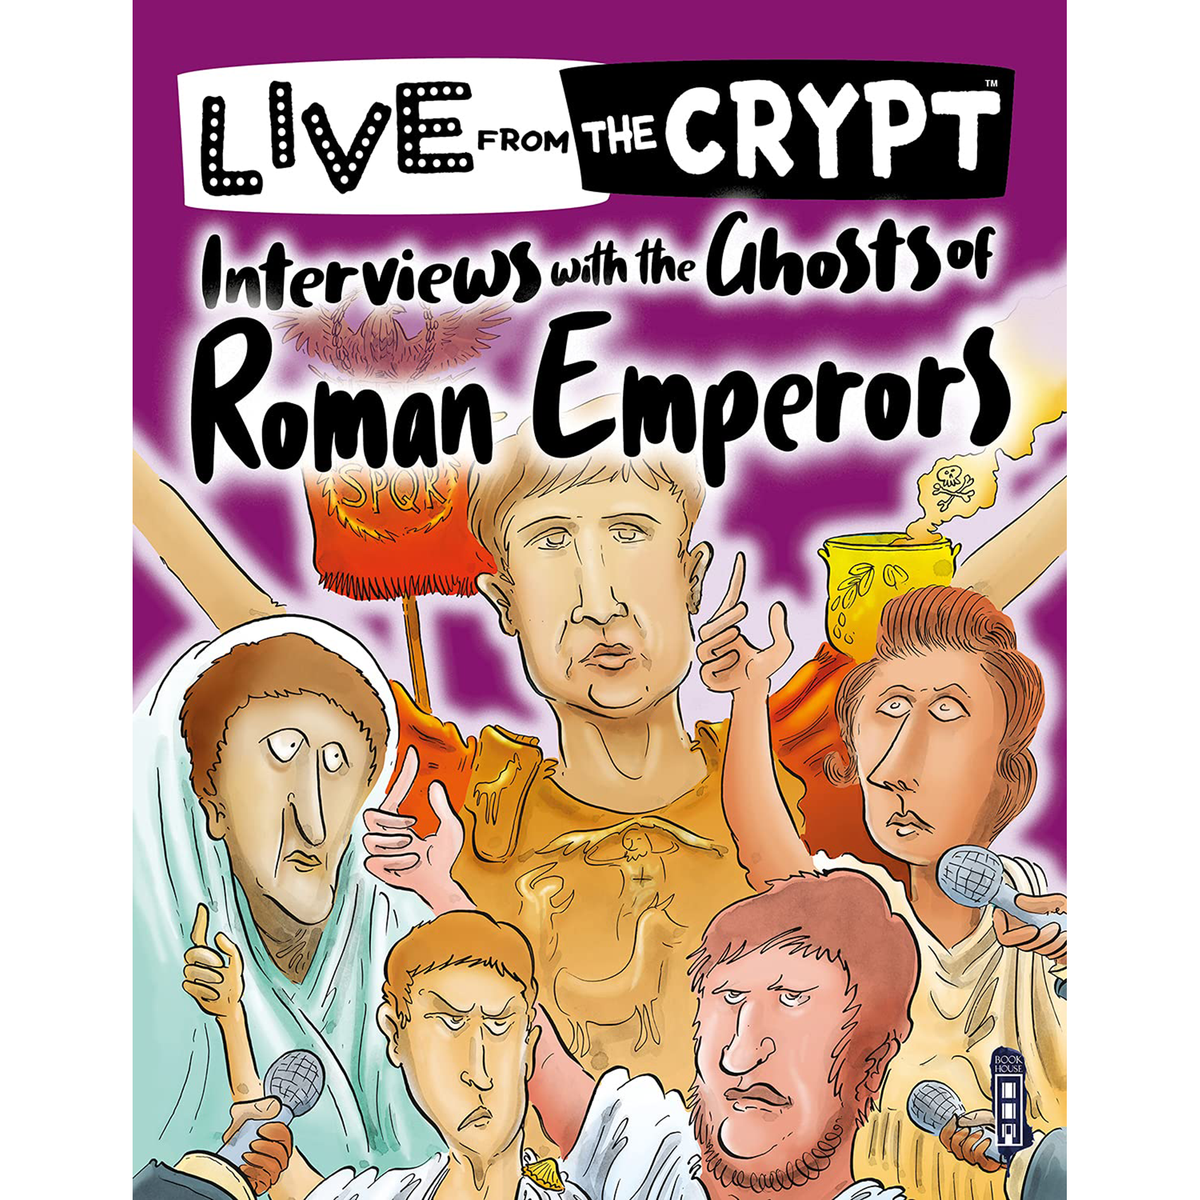 Live from the crypt: Interviews with the ghosts of Roman emperors